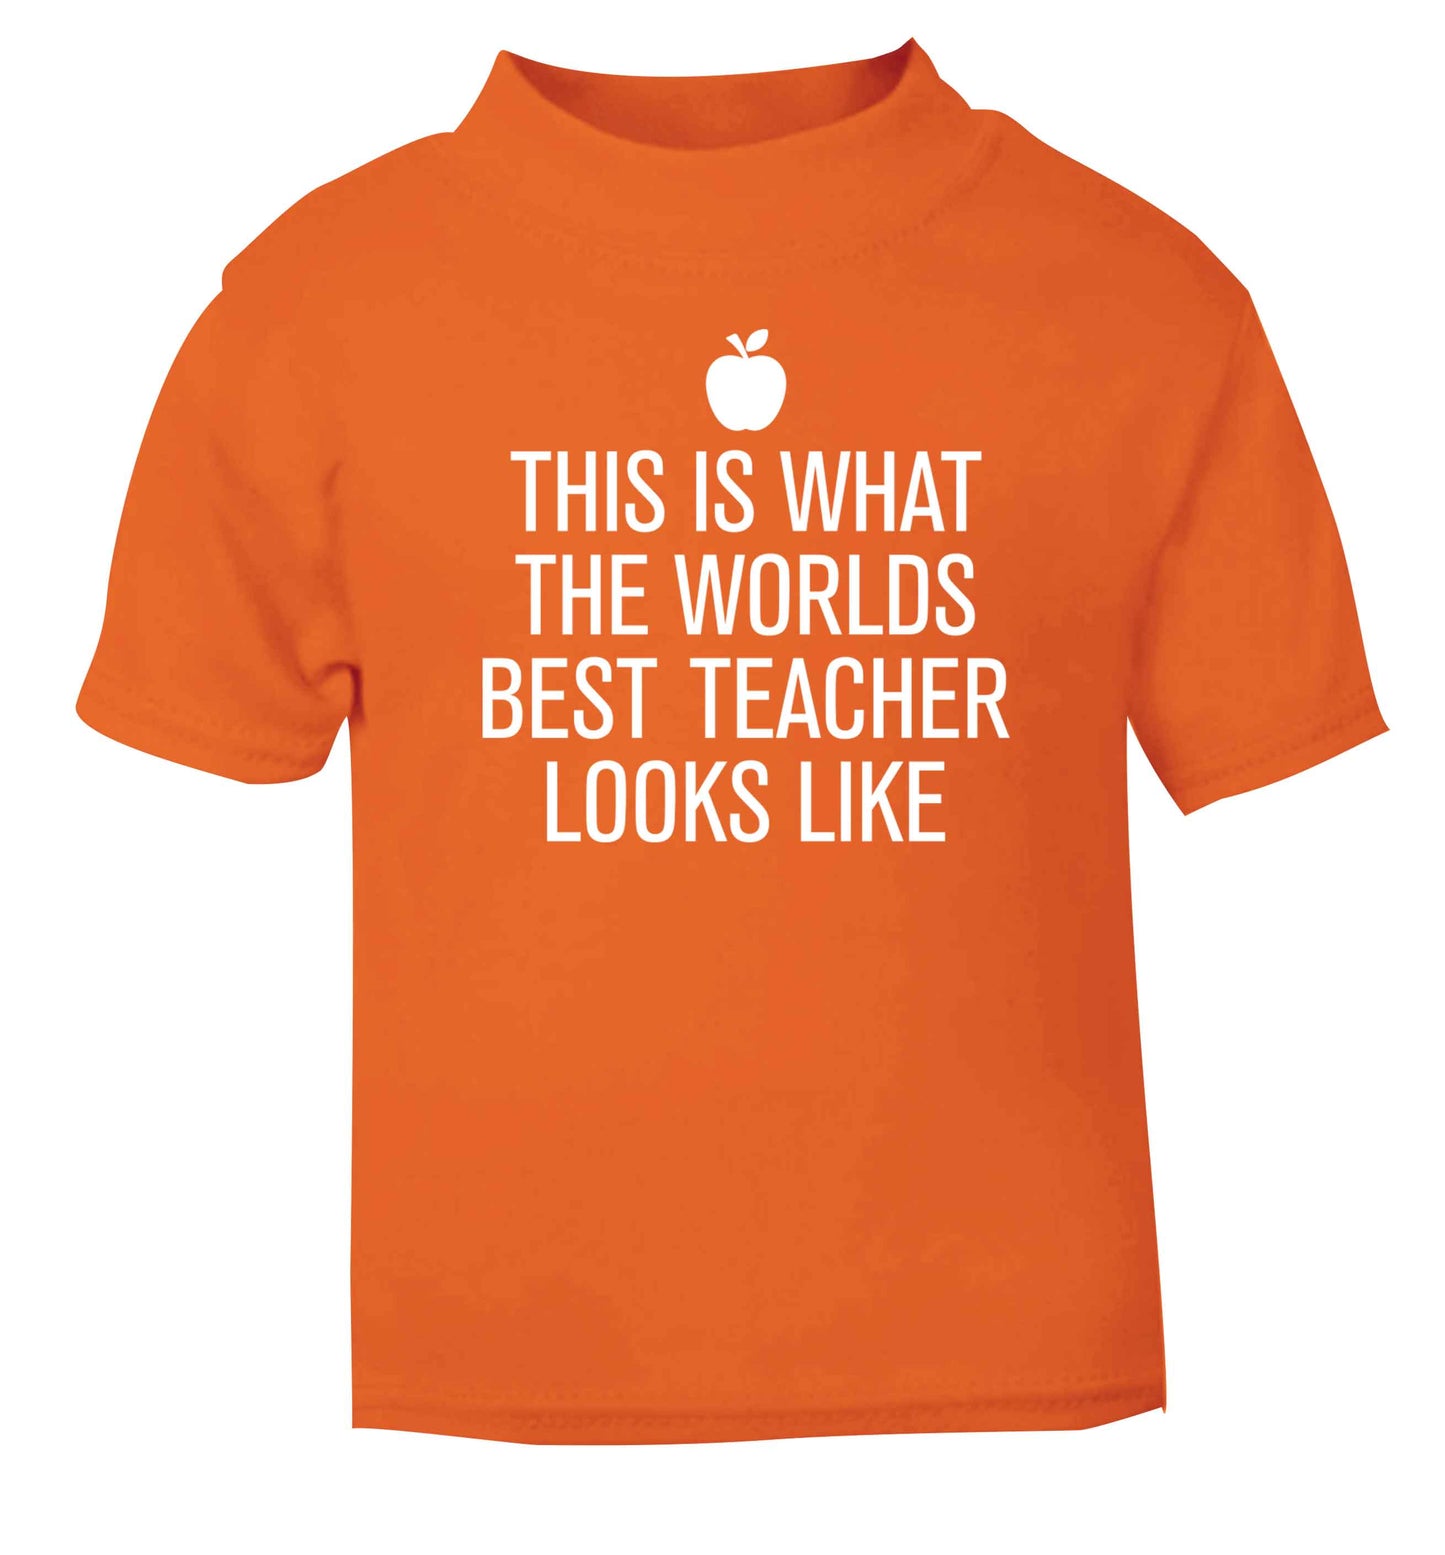 This is what the worlds best teacher looks like orange baby toddler Tshirt 2 Years